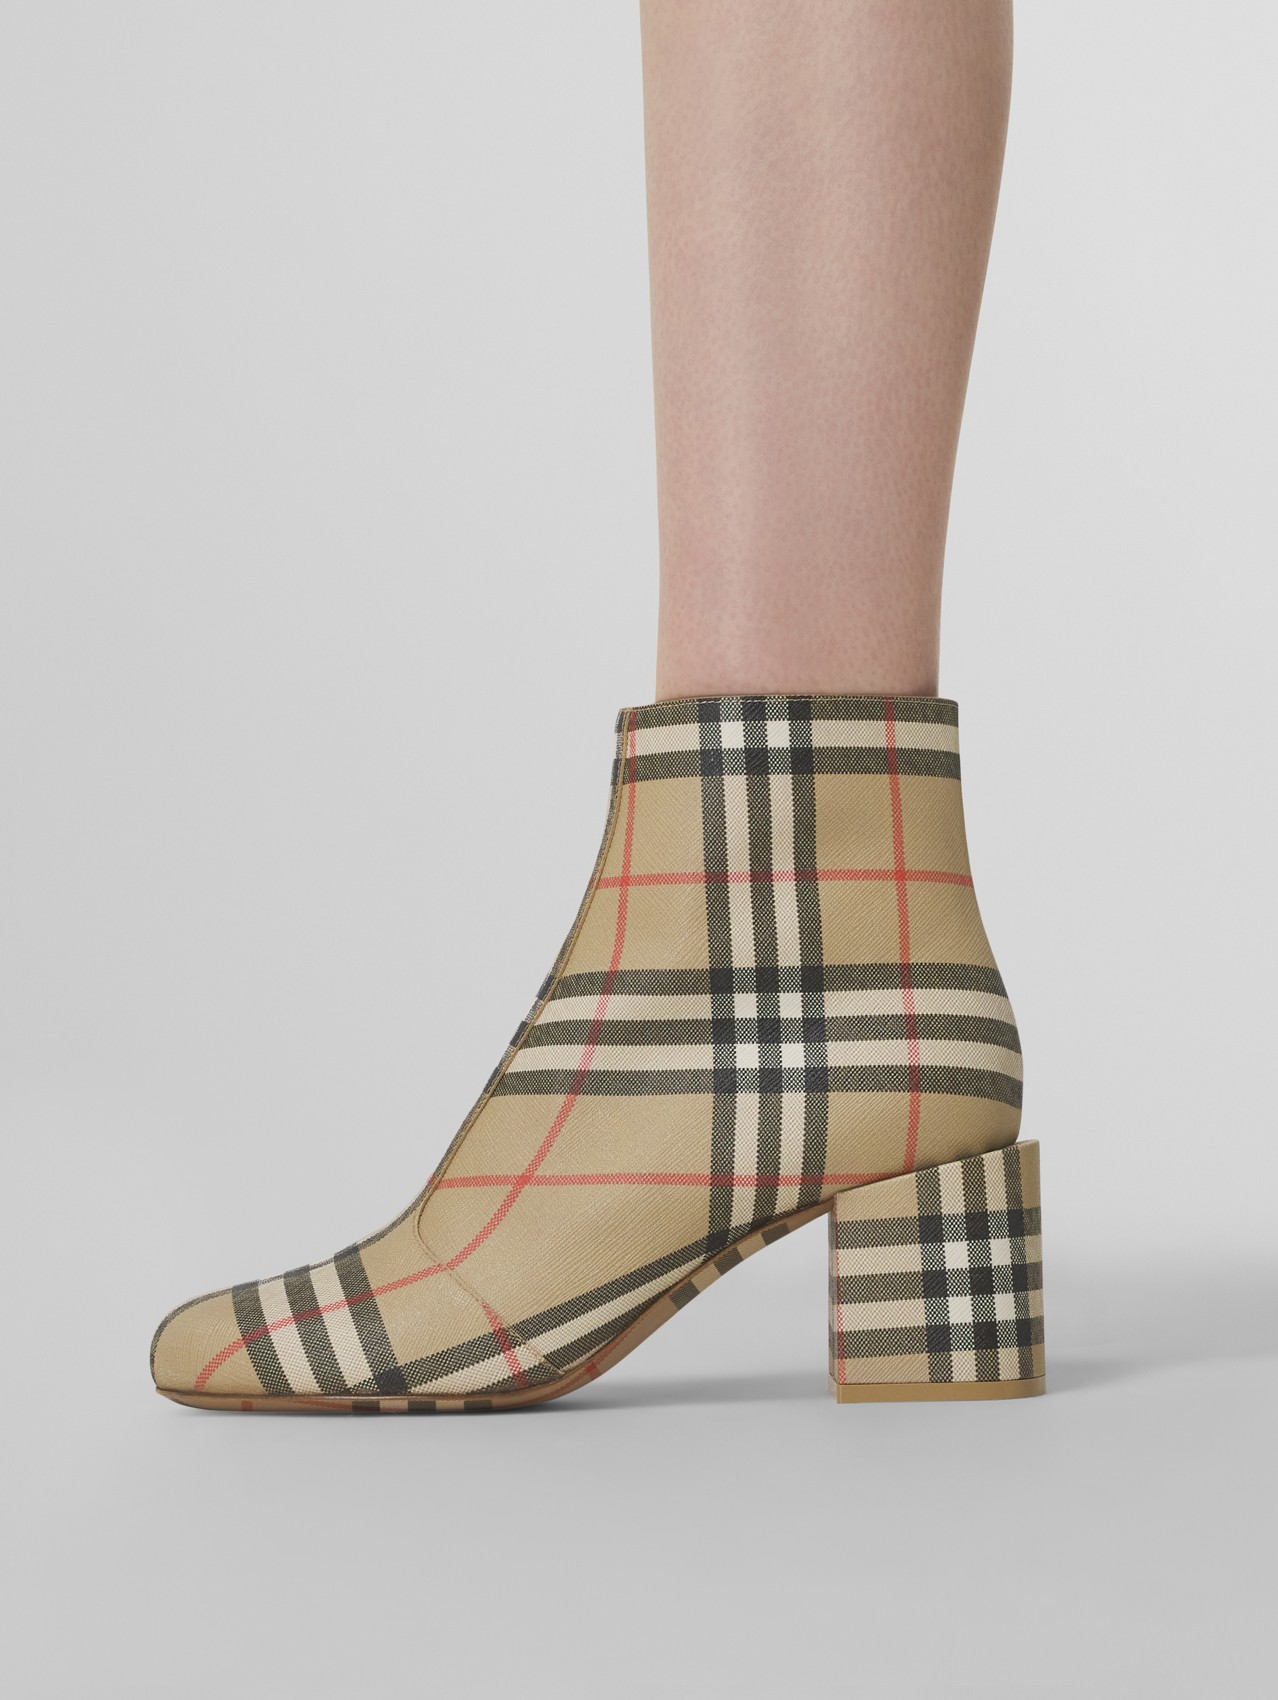 Vintage Check Block-heel Ankle Boots in Archive Beige